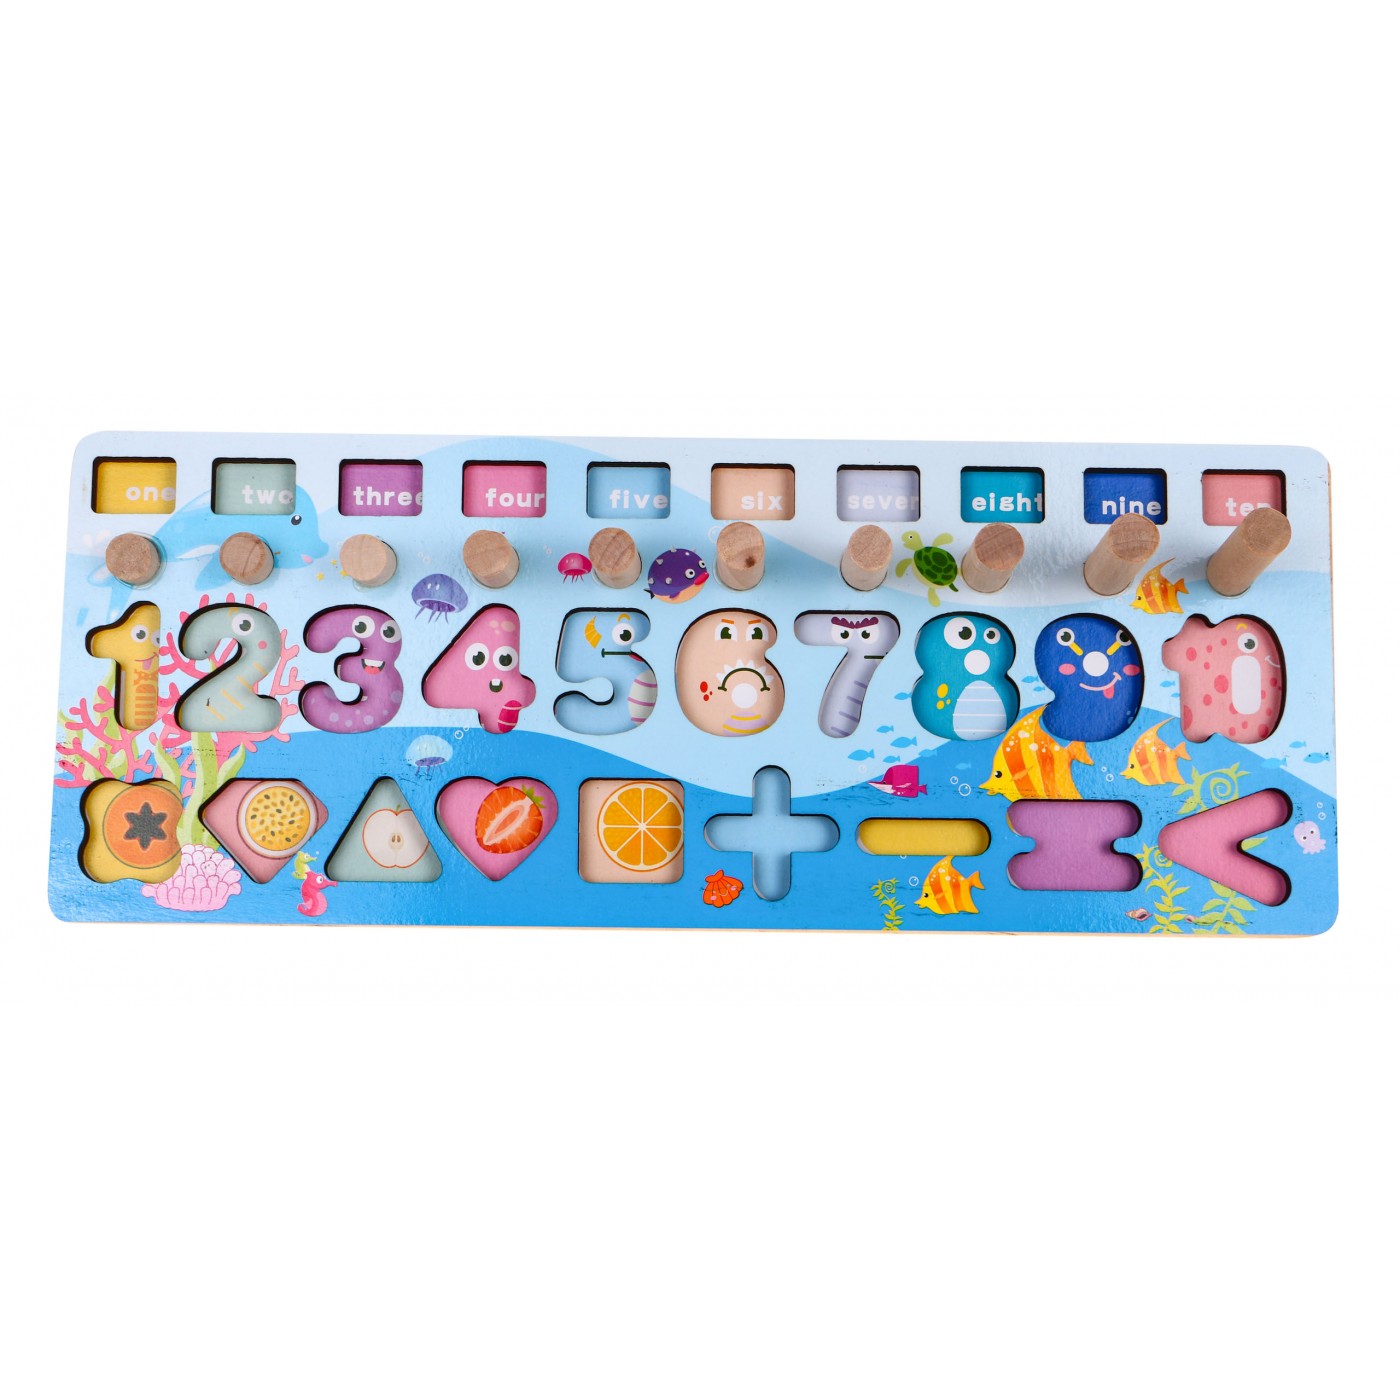 Wooden set of games for learning